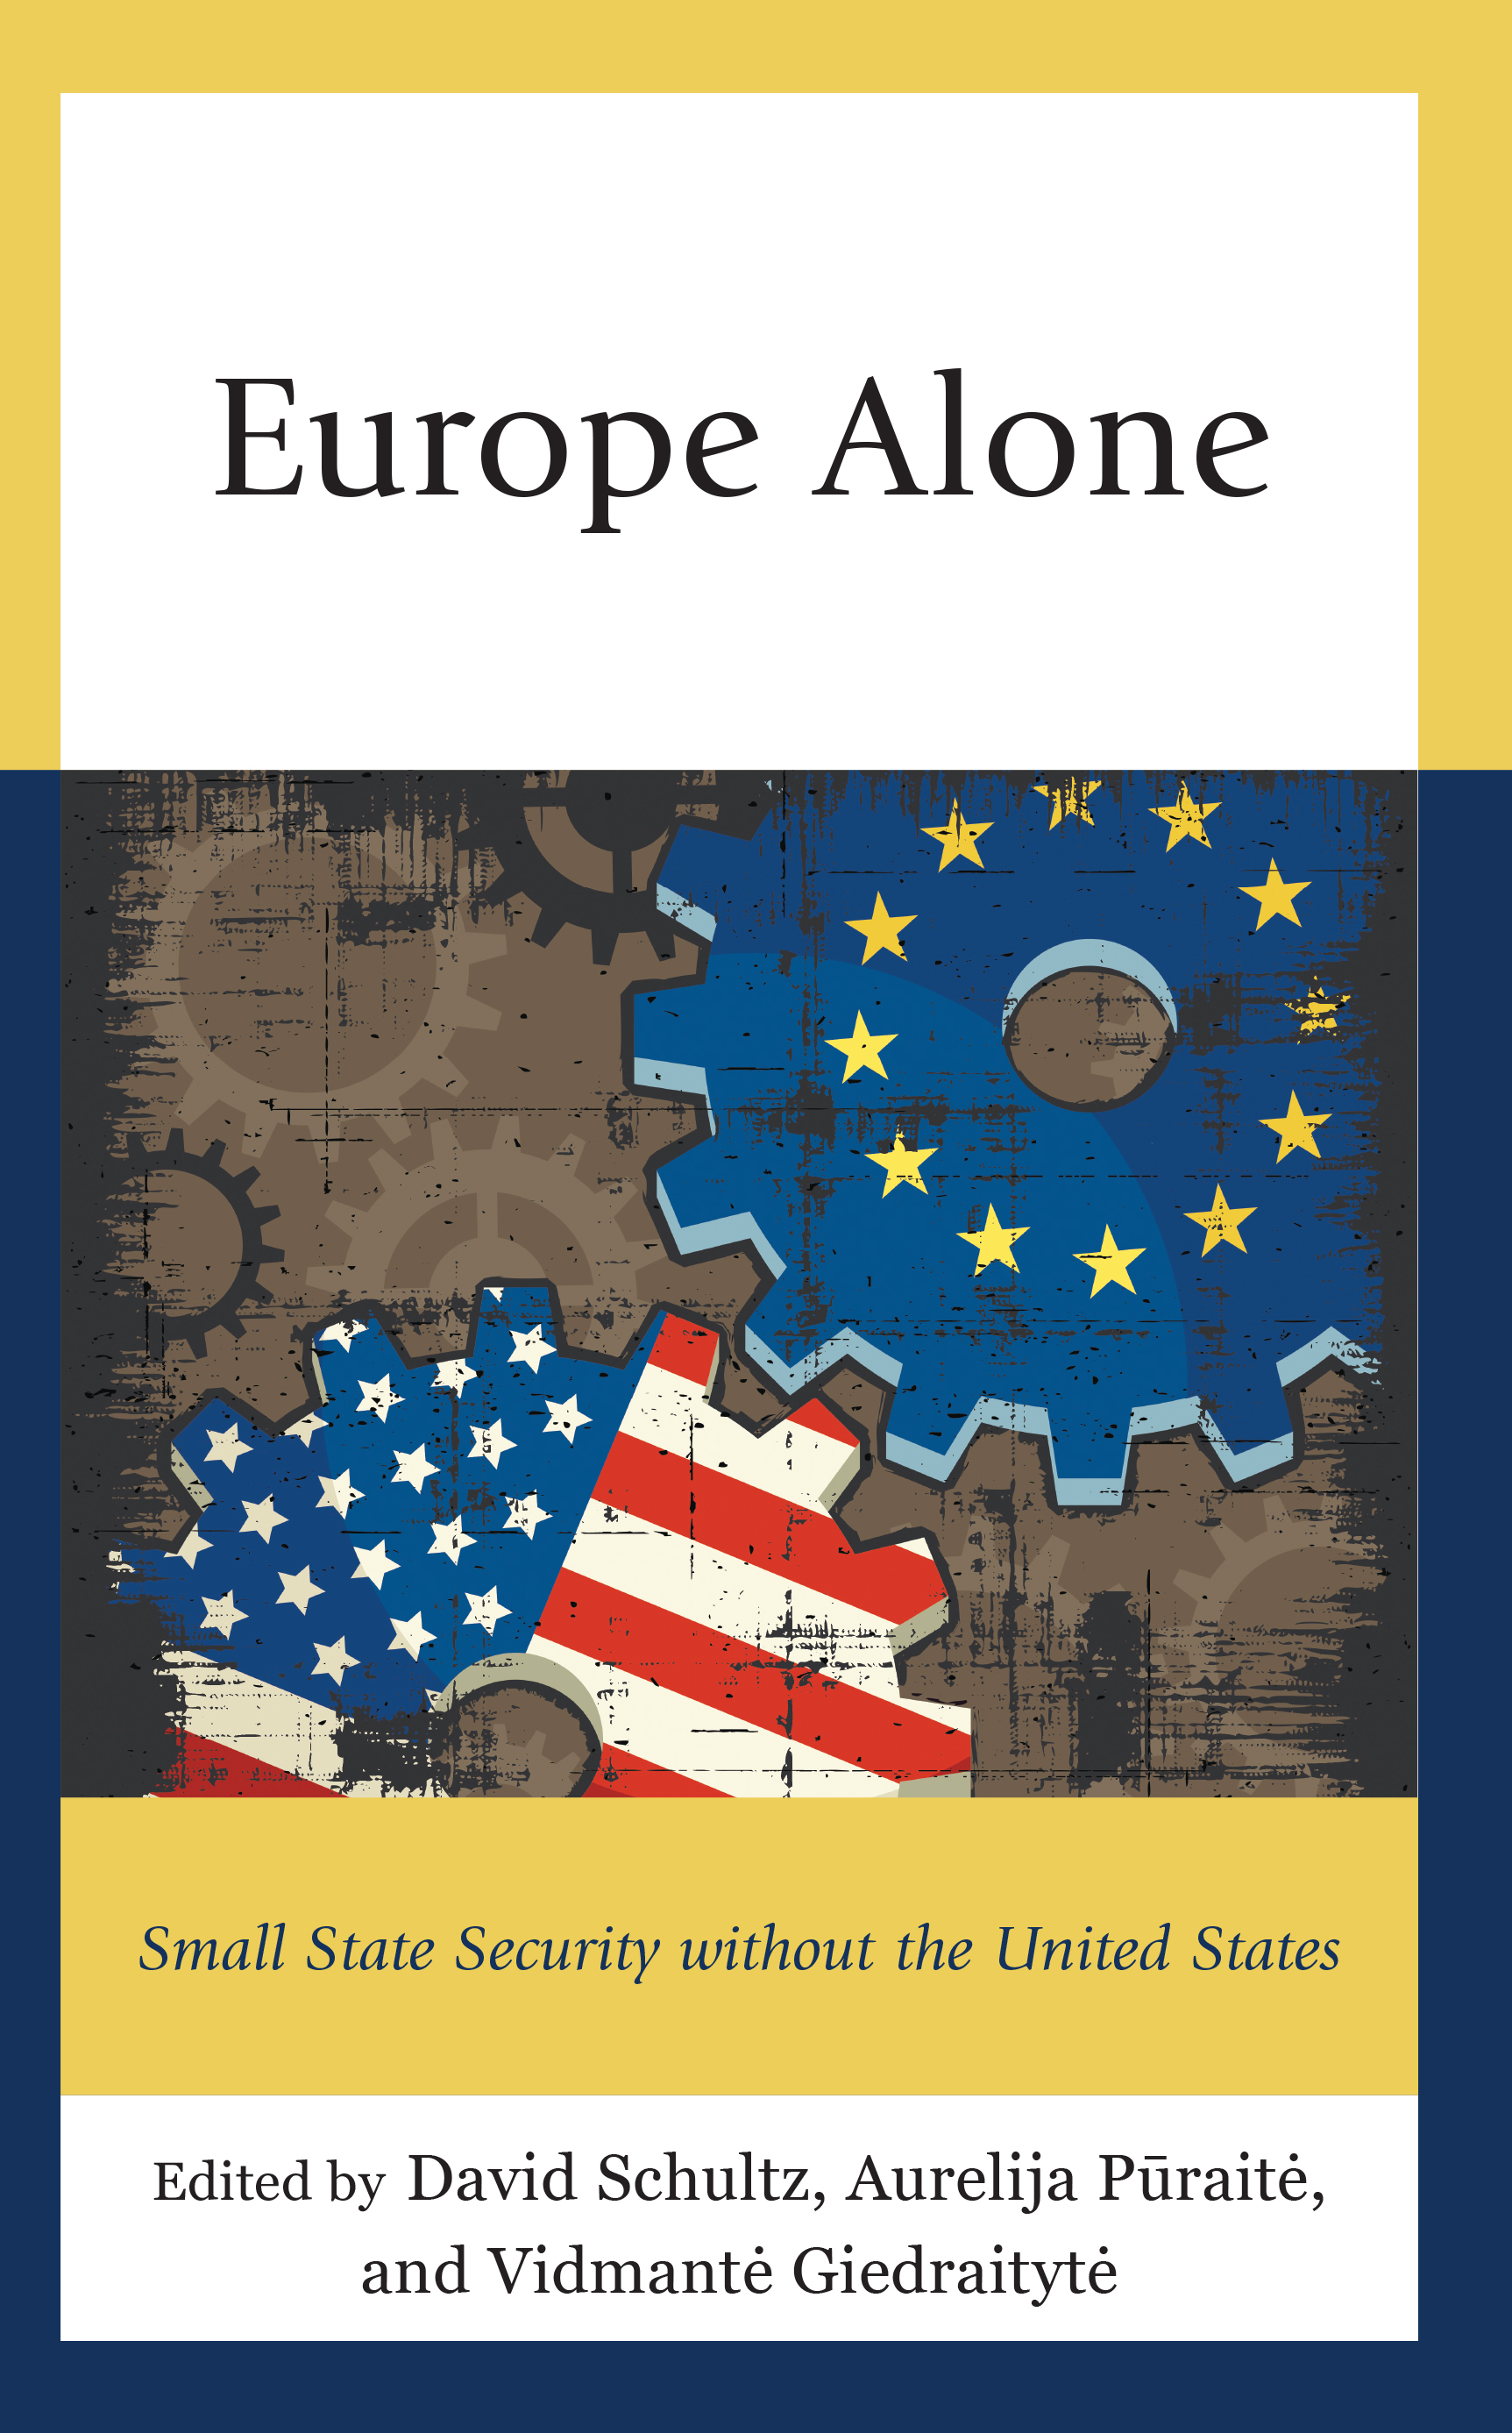 Europe Alone: Small State Security without the United States